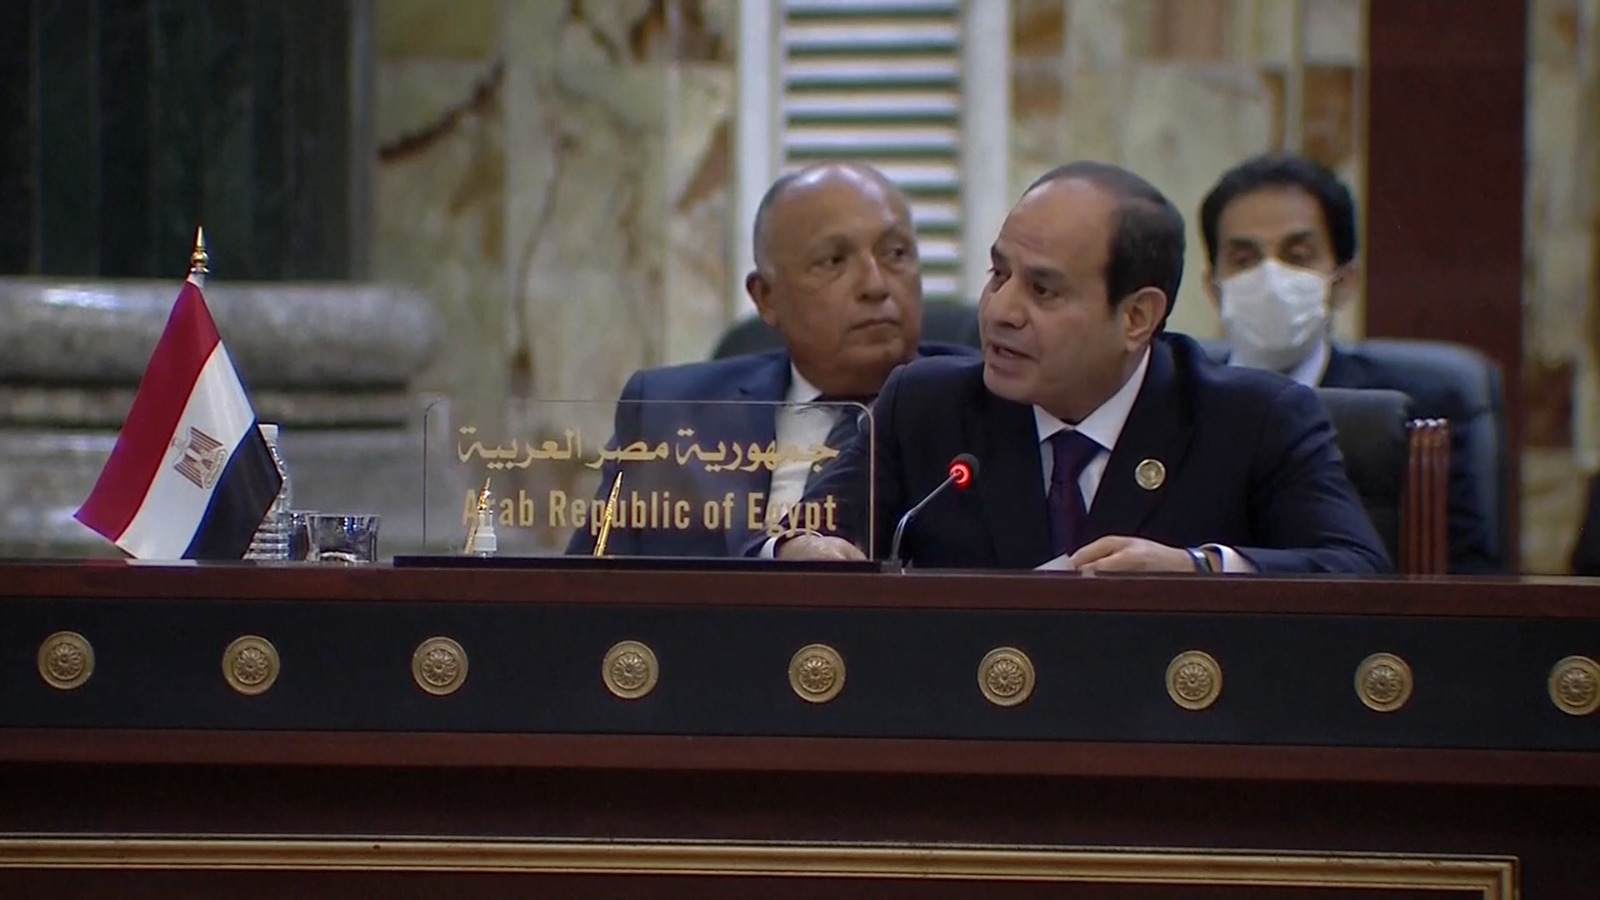 Egypt's President: the upcoming Iraqi elections are a popular responsibility